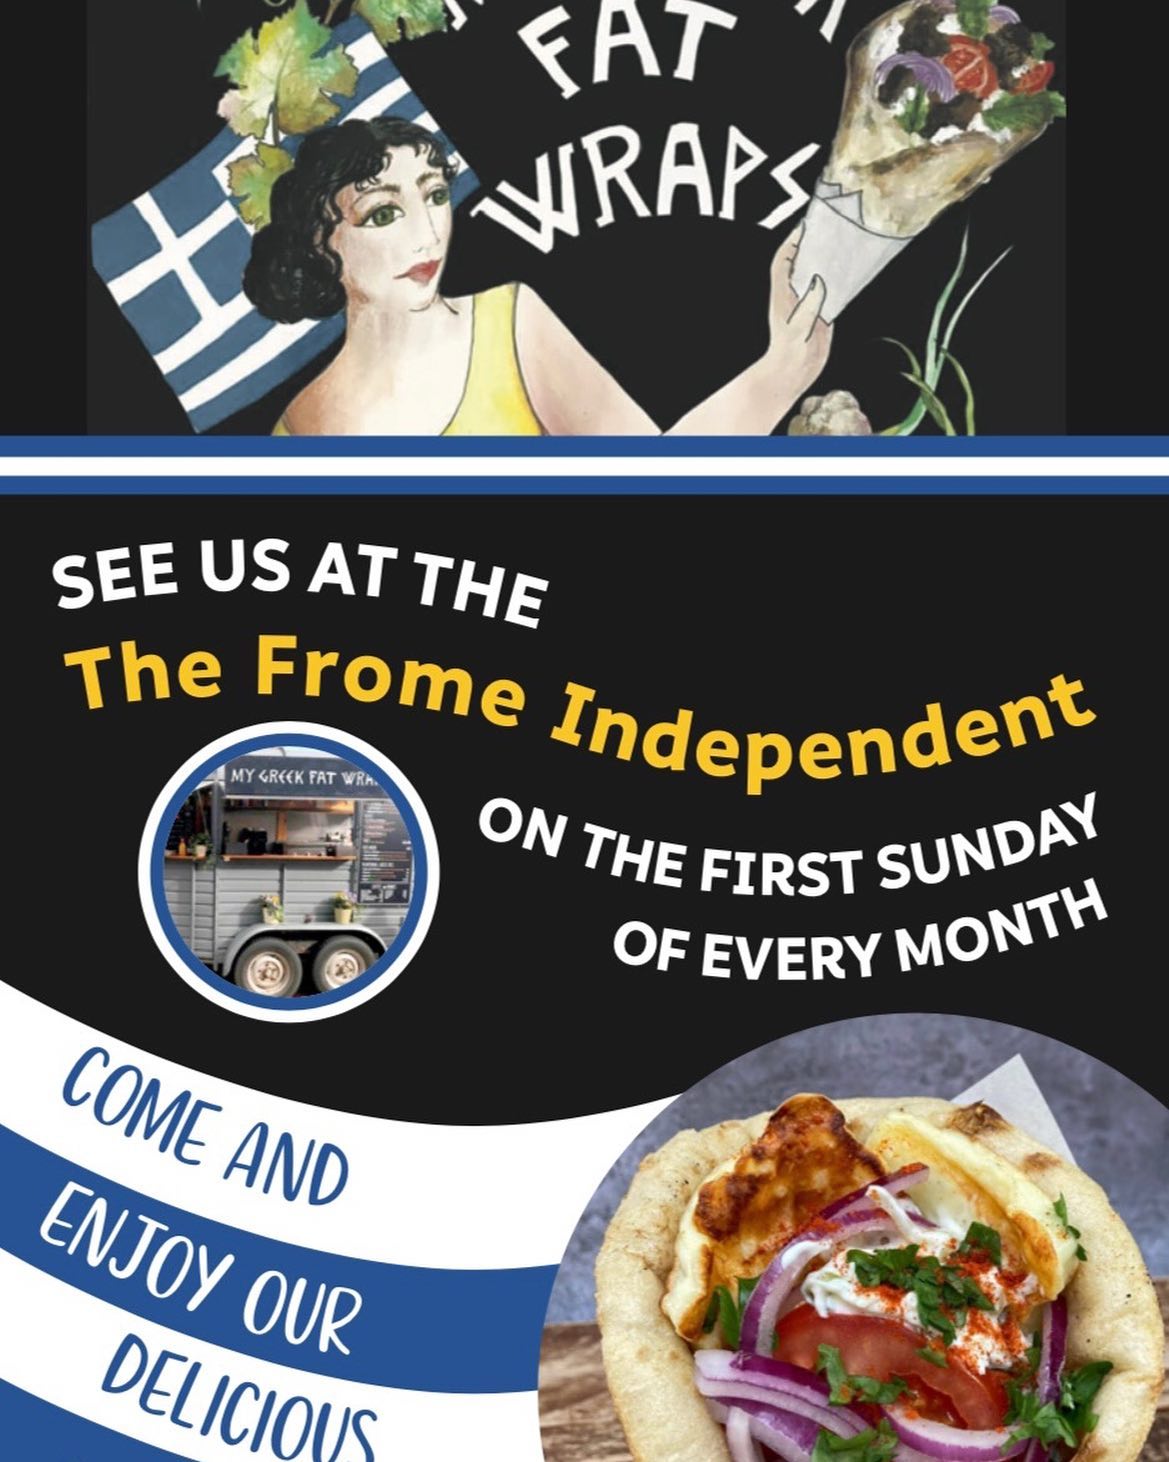 This Sunday 🇬🇷🇬🇷🇬🇷 Greek wraps 🌮🌮🌮 at The Frome Indipendent Market ❤️❤️❤️❤️ See you there lovelies